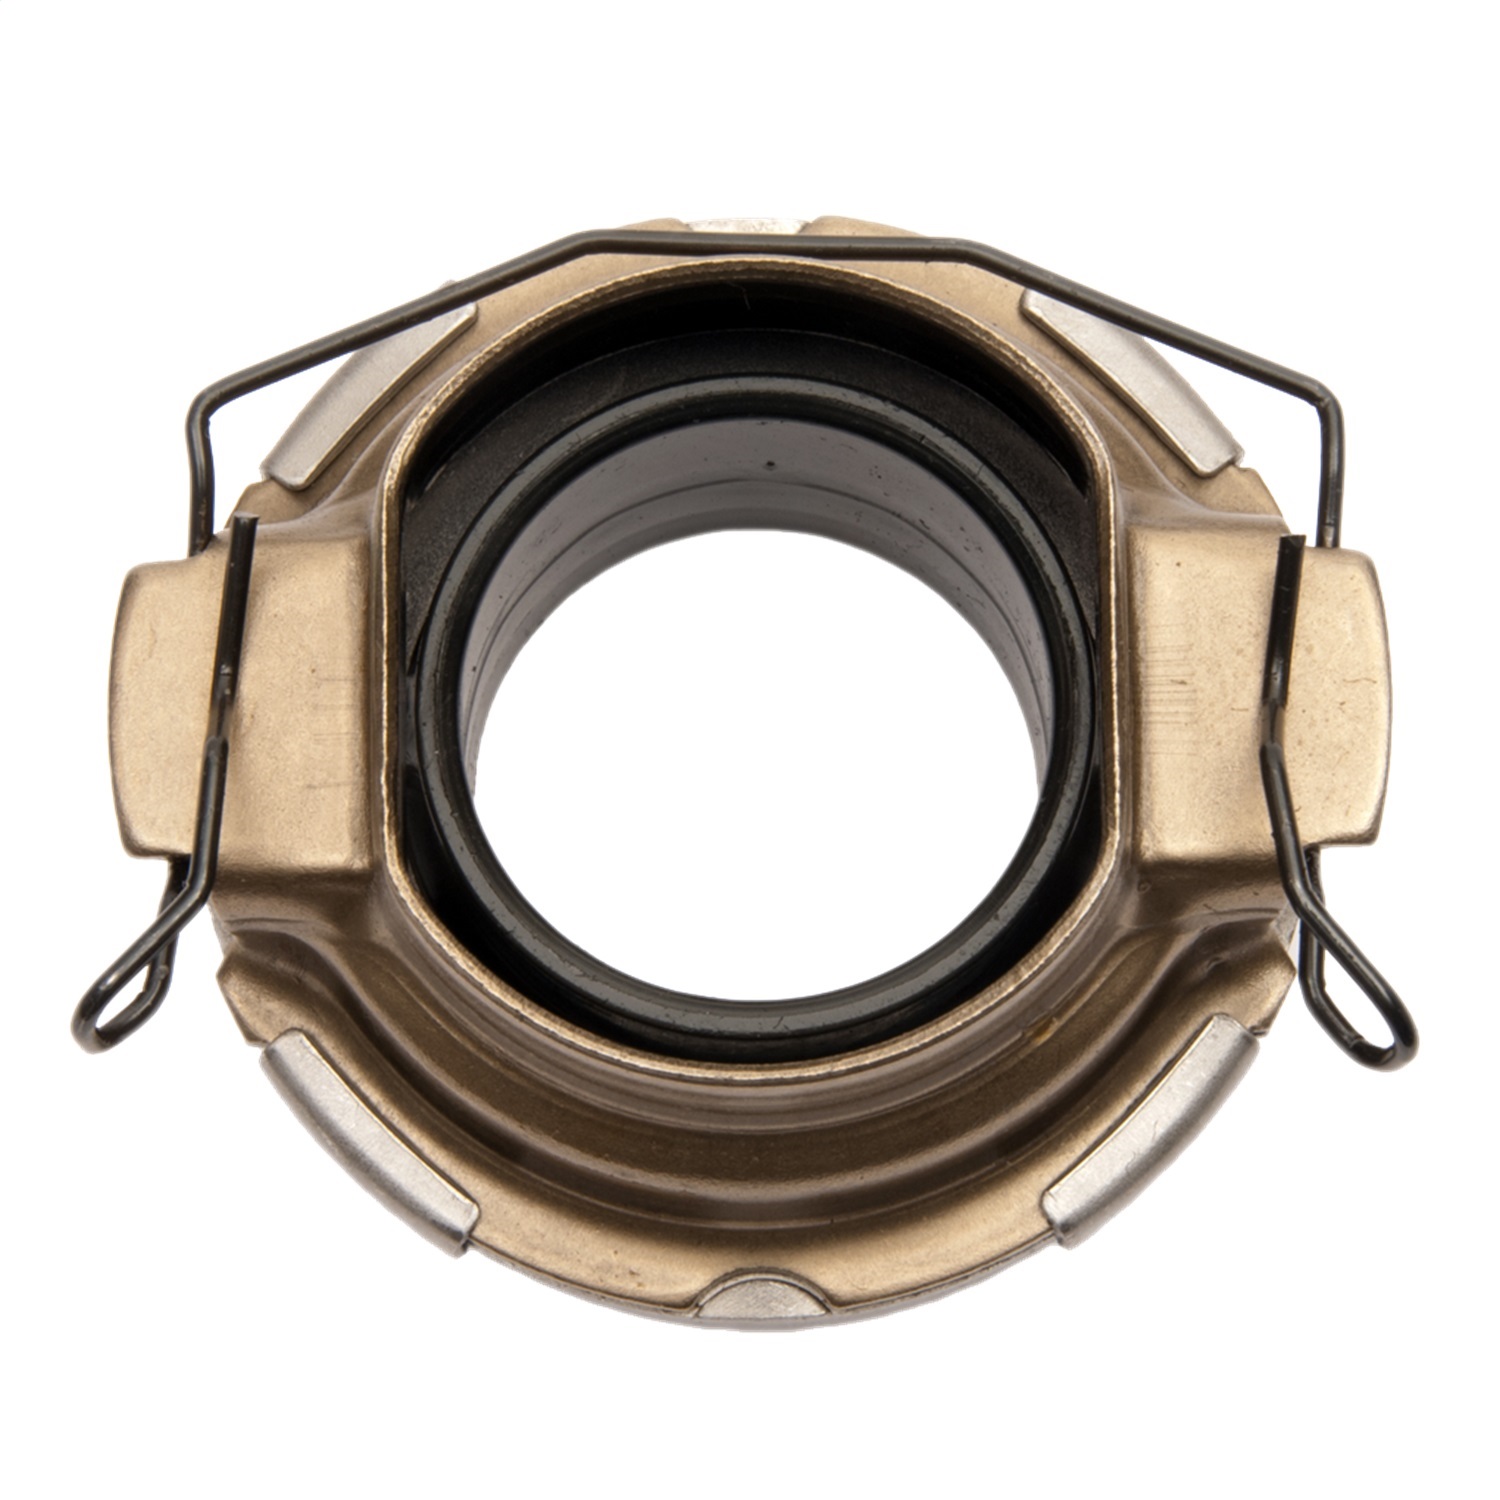 Centerforce Centerforce 444 Throwout Bearing